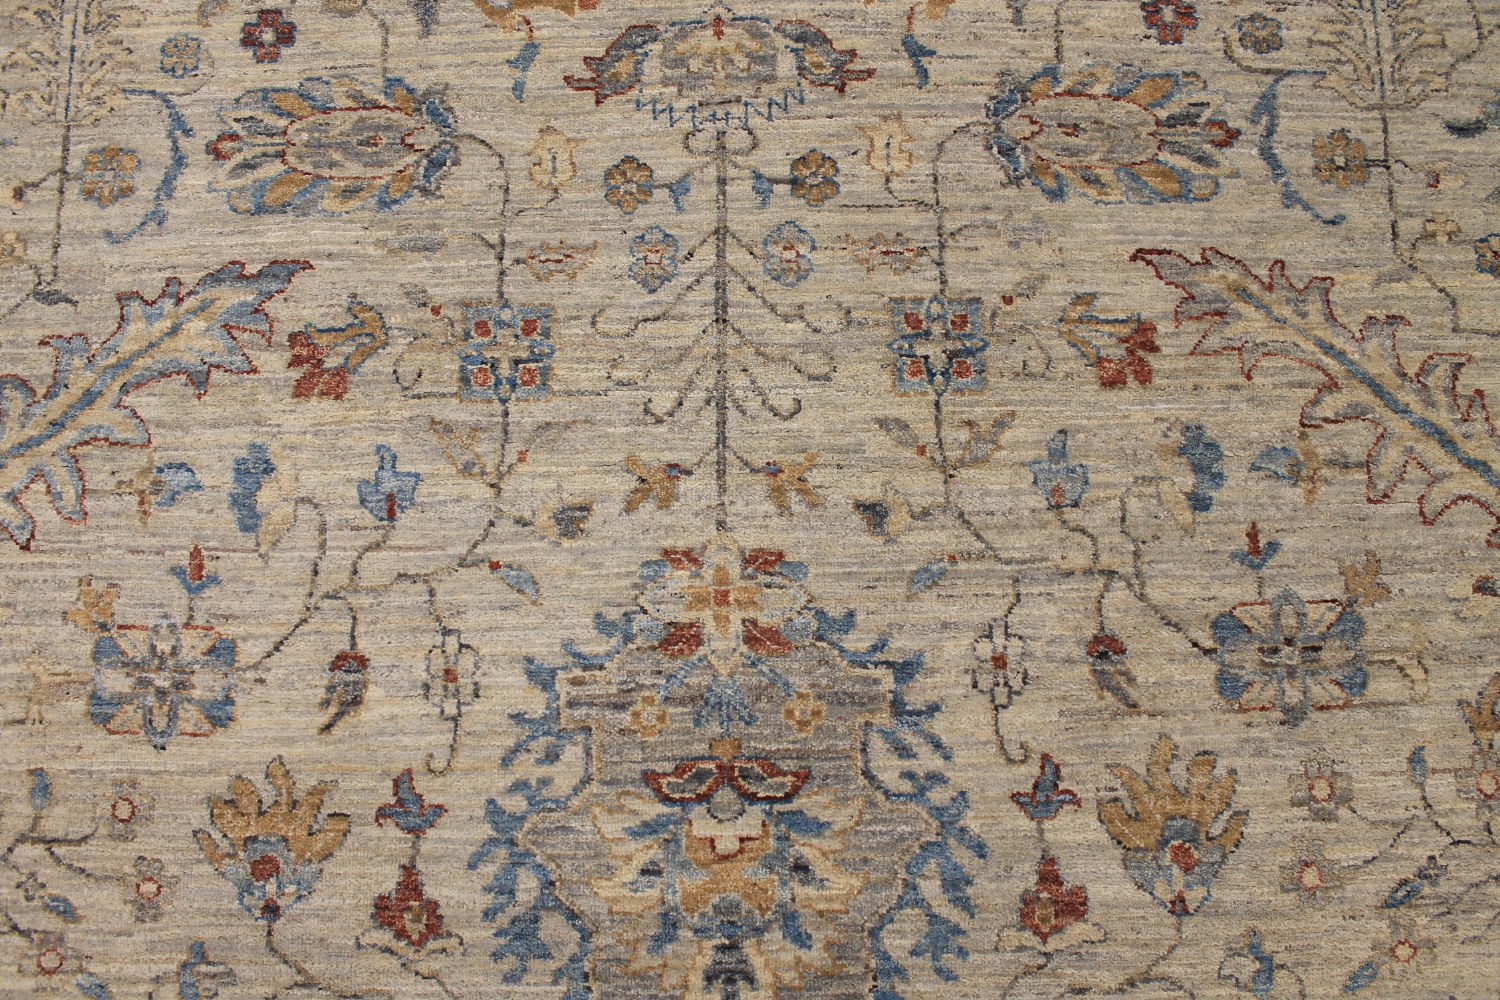 10x14 Traditional Hand Knotted Wool Area Rug - MR028609